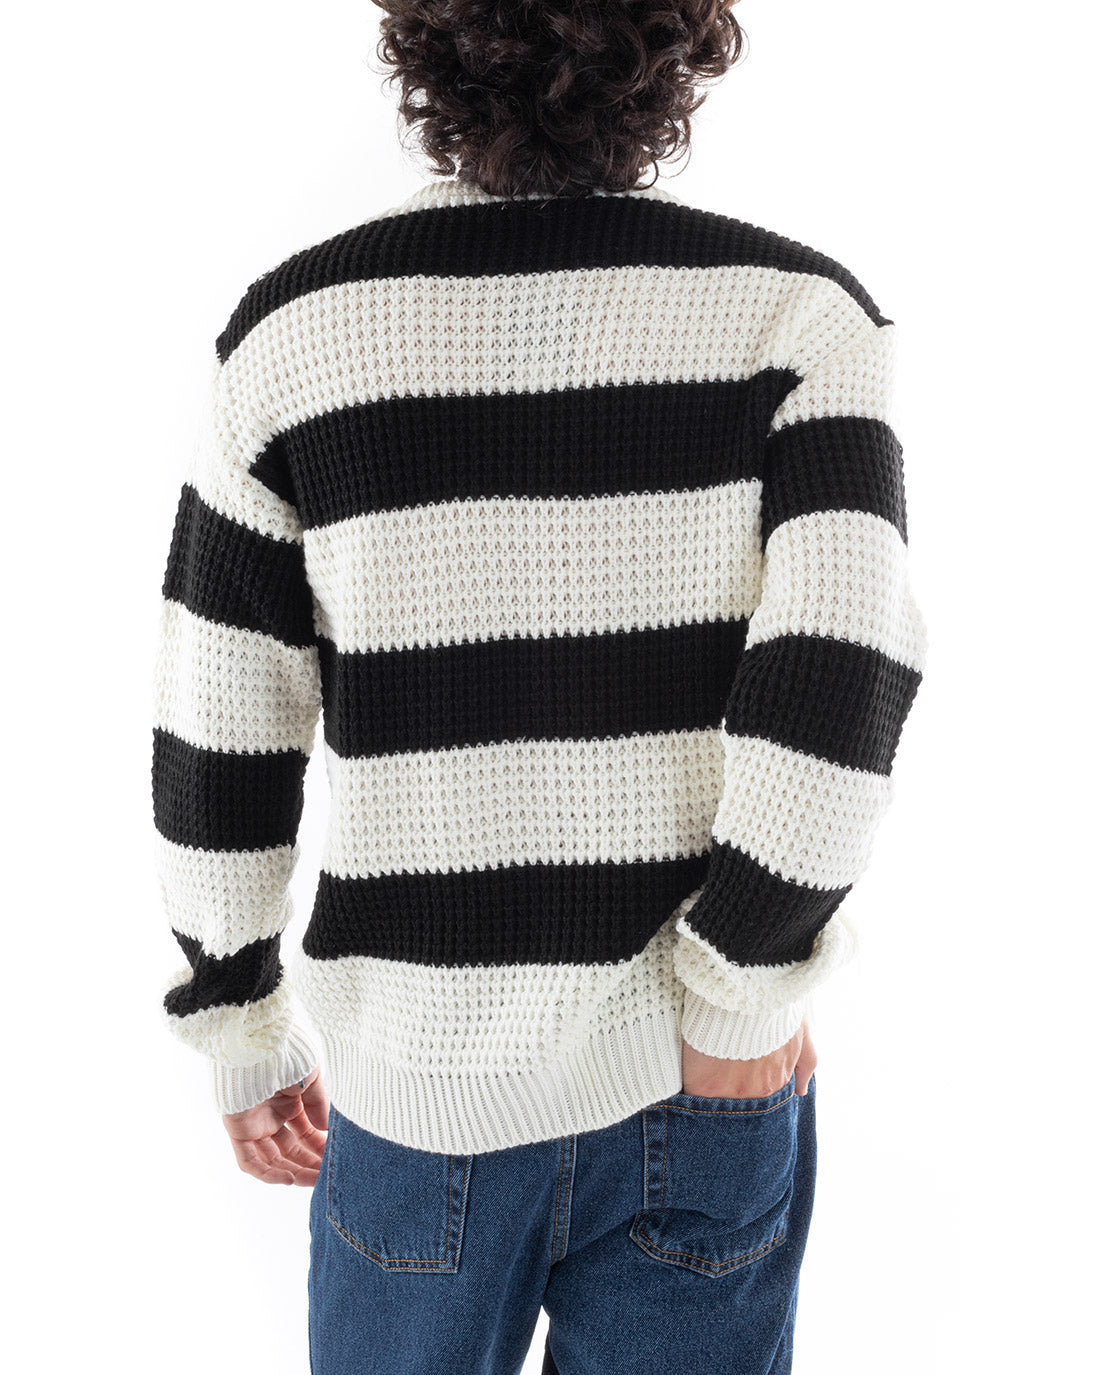 Men's Sweater Knitted Pullover Striped Two-Tone Round Neck Black White GIOSAL-M2610A